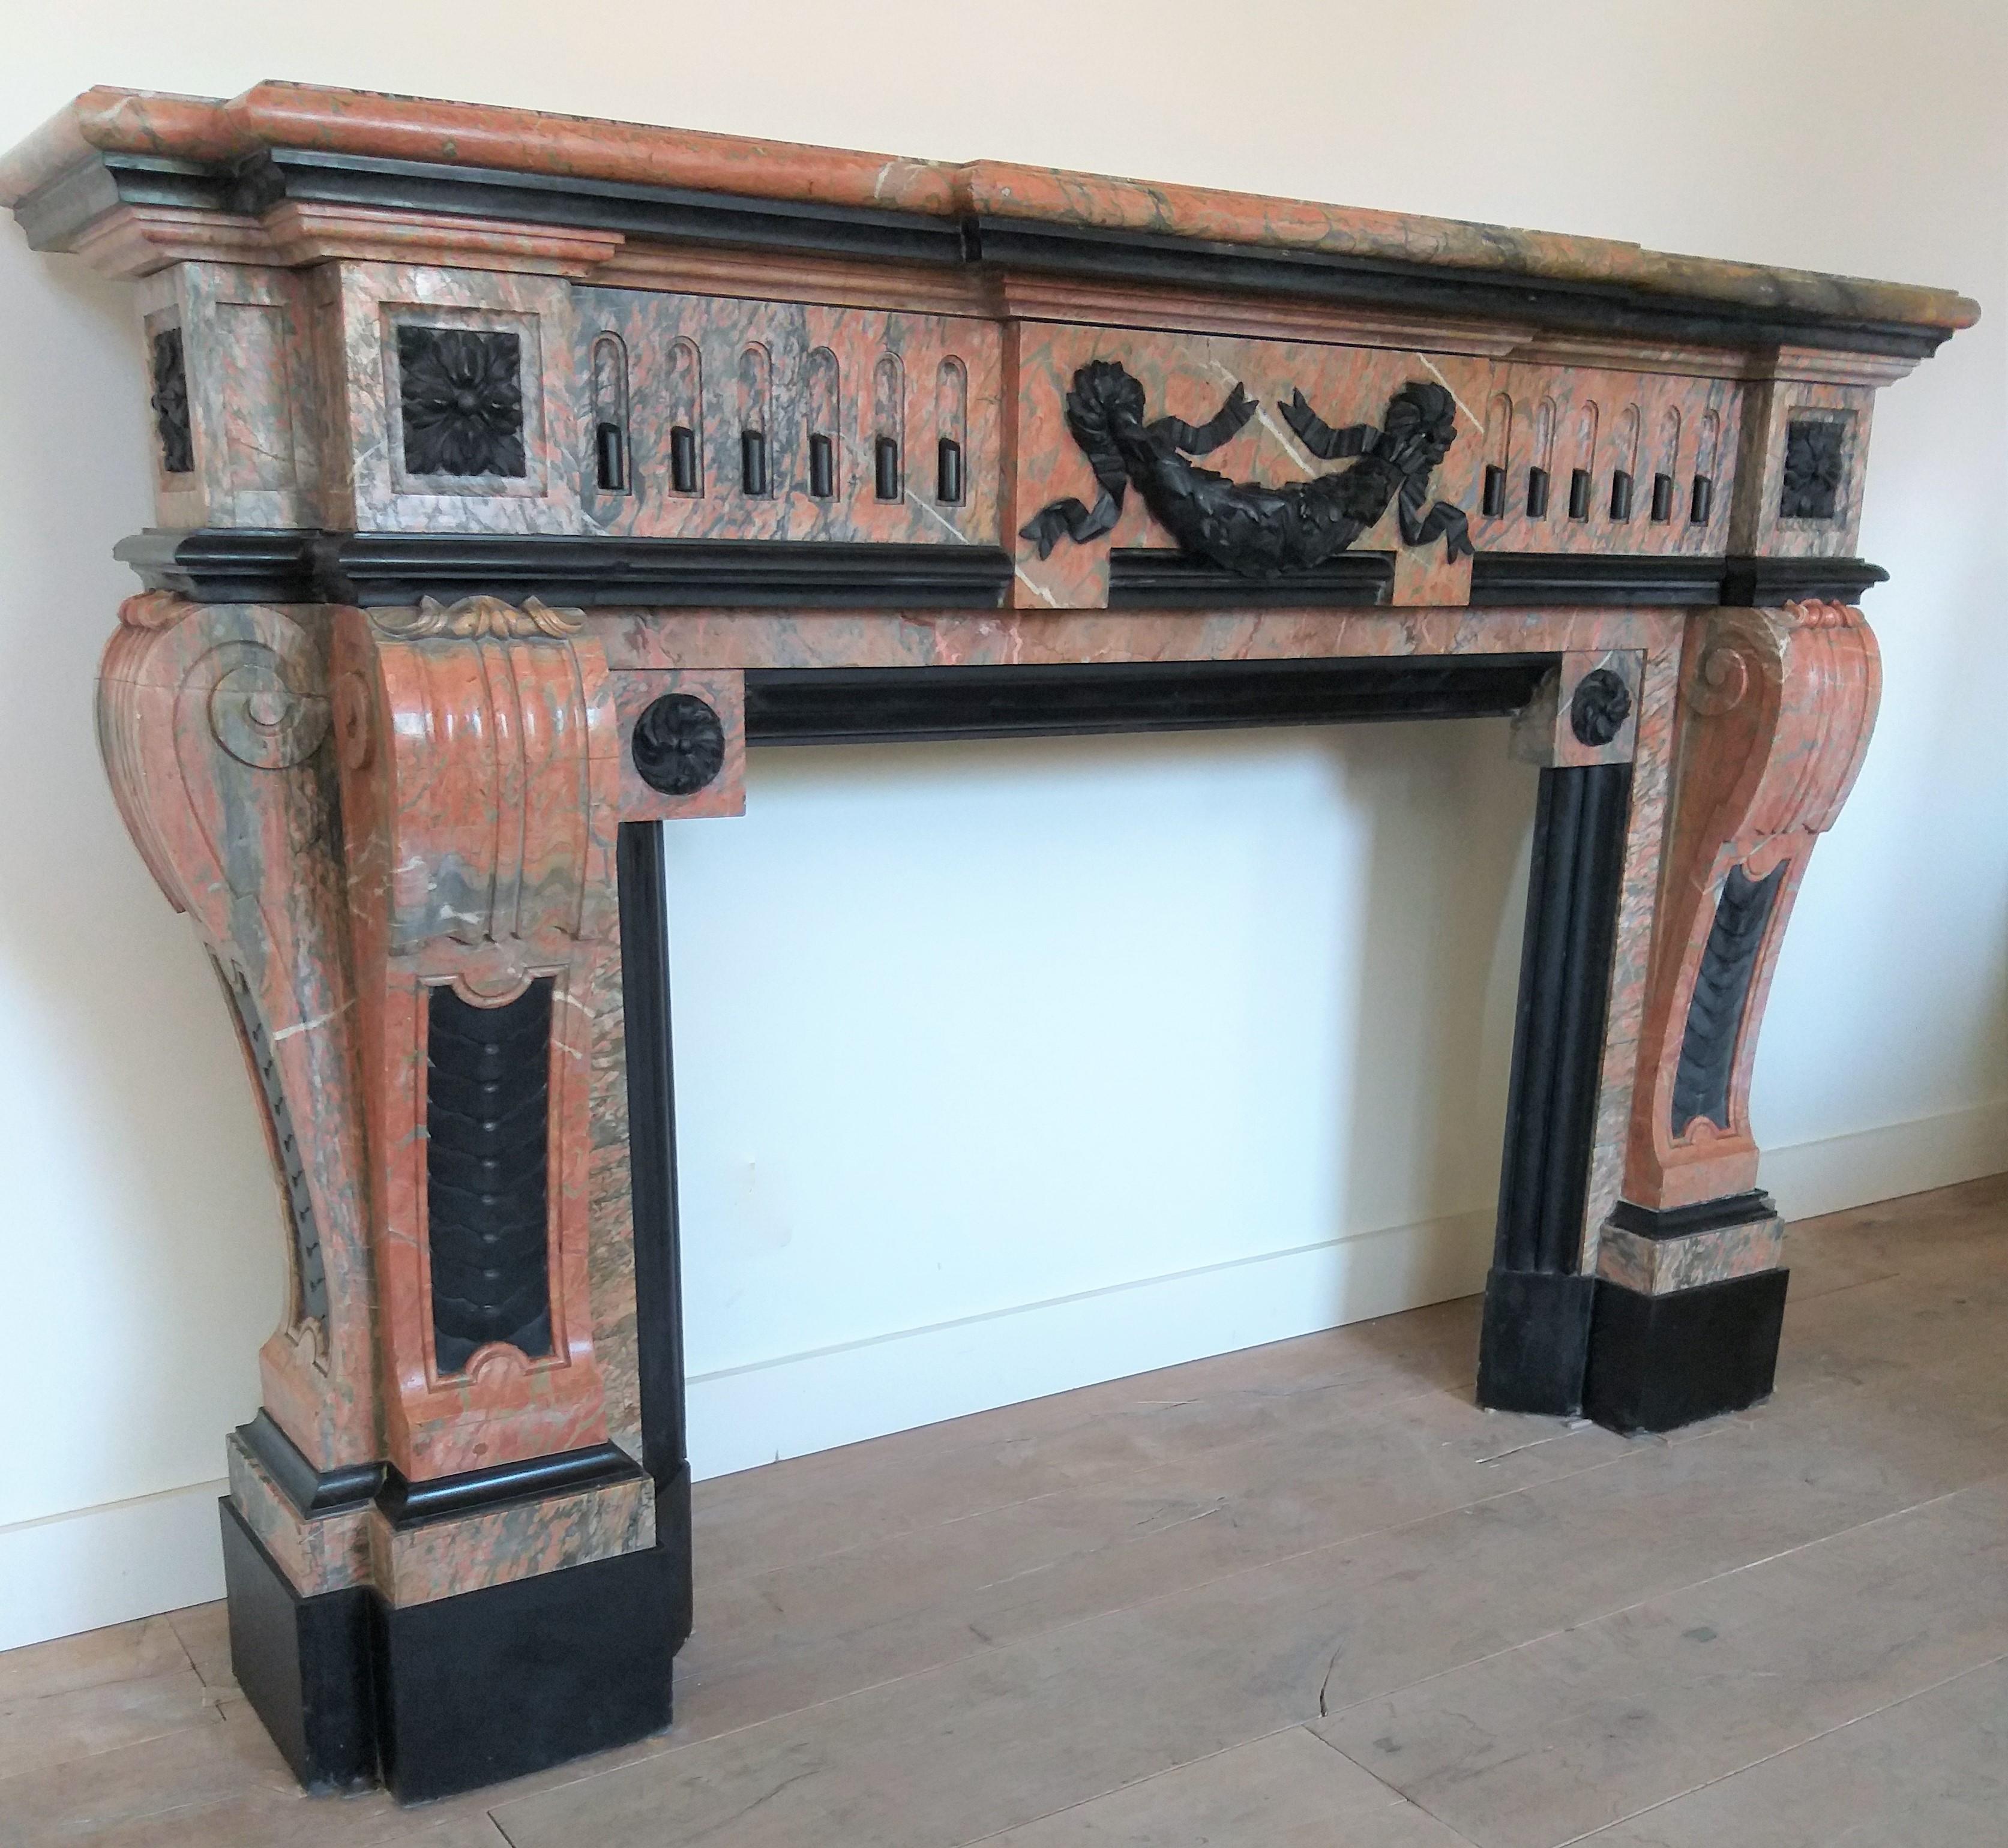 This prestigious Napoléon III fireplace was made in the 19th. century. Found in a noble Maison du Maitre in Brussels. The marbles are Bois Jourdan (France) and Noir de Mazy (Belgium). The pilasters for the jambs, the façet-shaped panels, the